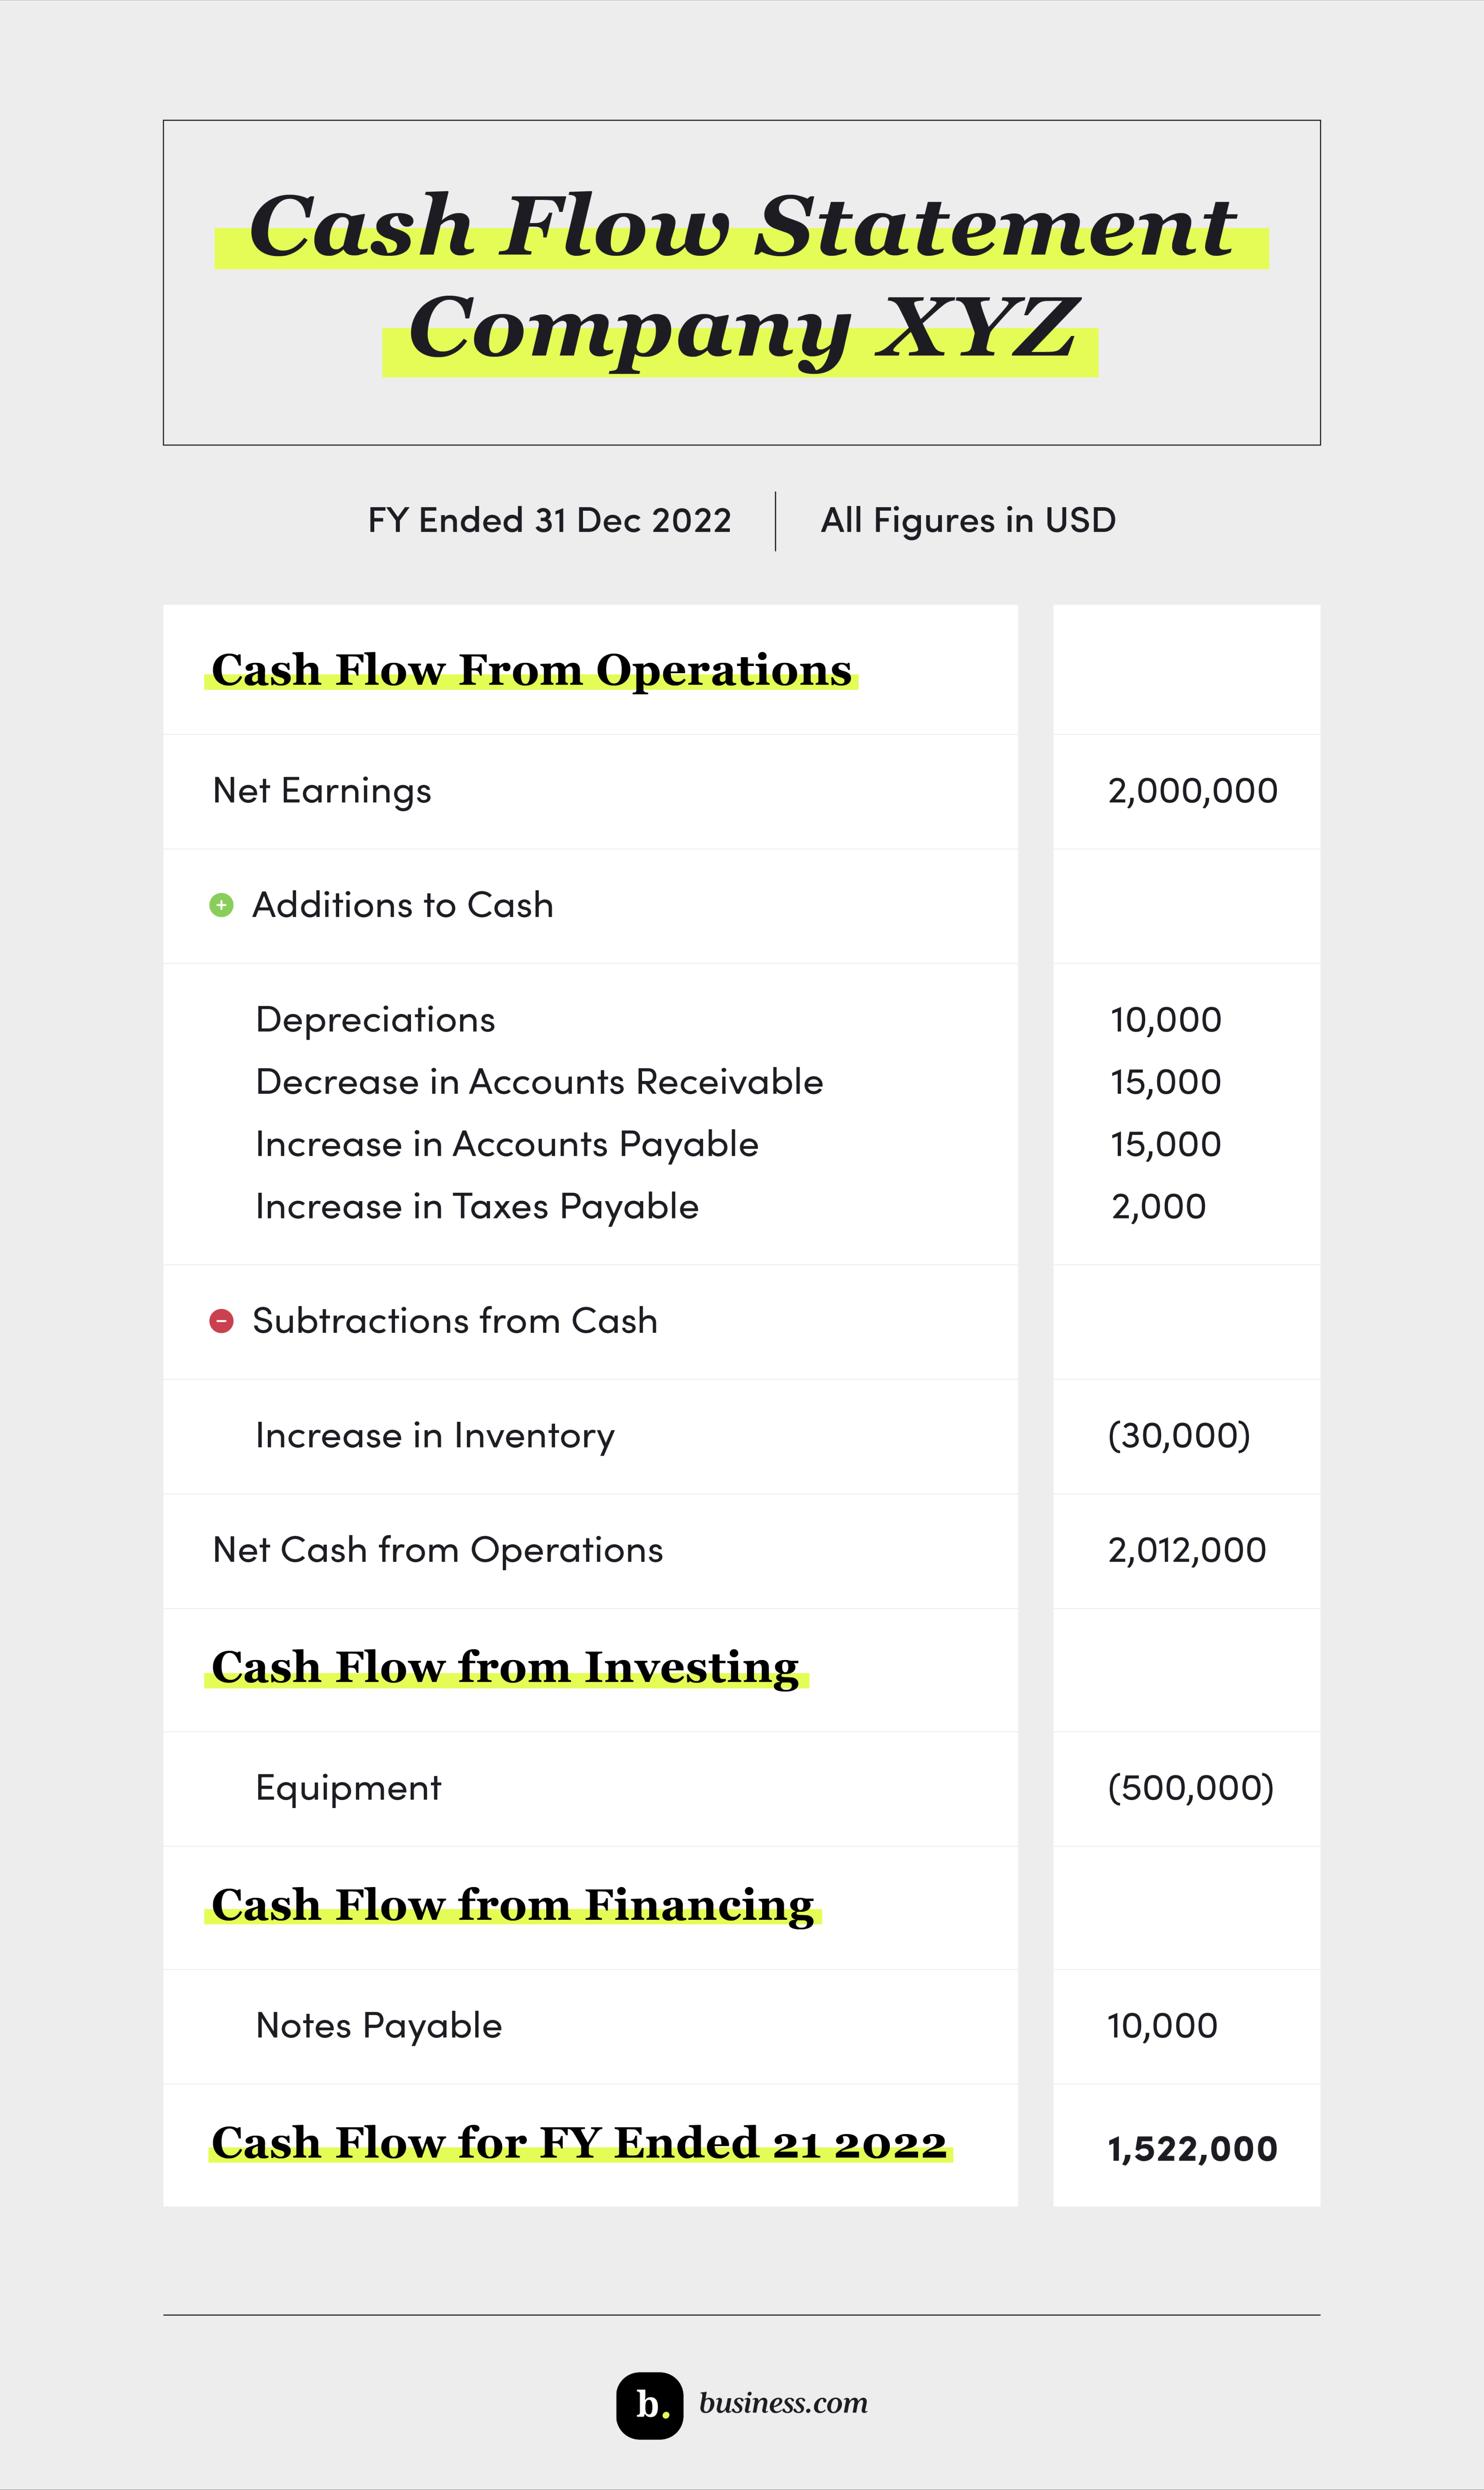 What Is a Cash Flow Statement?